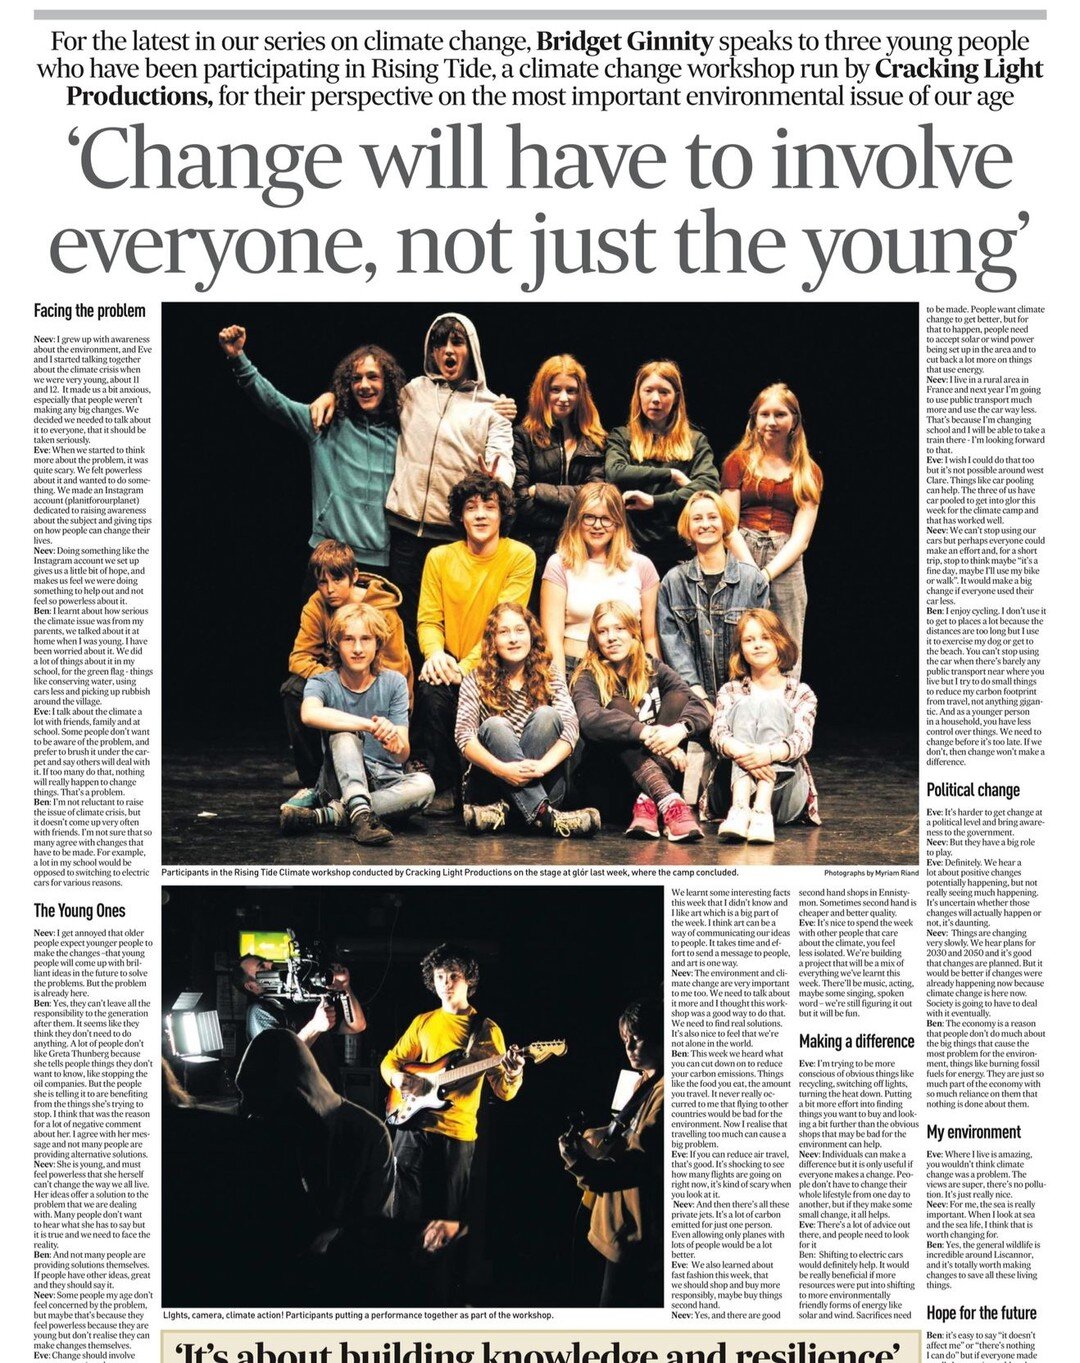 Neev, Eve and Ben tell it how it is in this @theclarechampion article. Thanks Bridget for taking the time to come and speak to the Clare Rising Tide Crew.